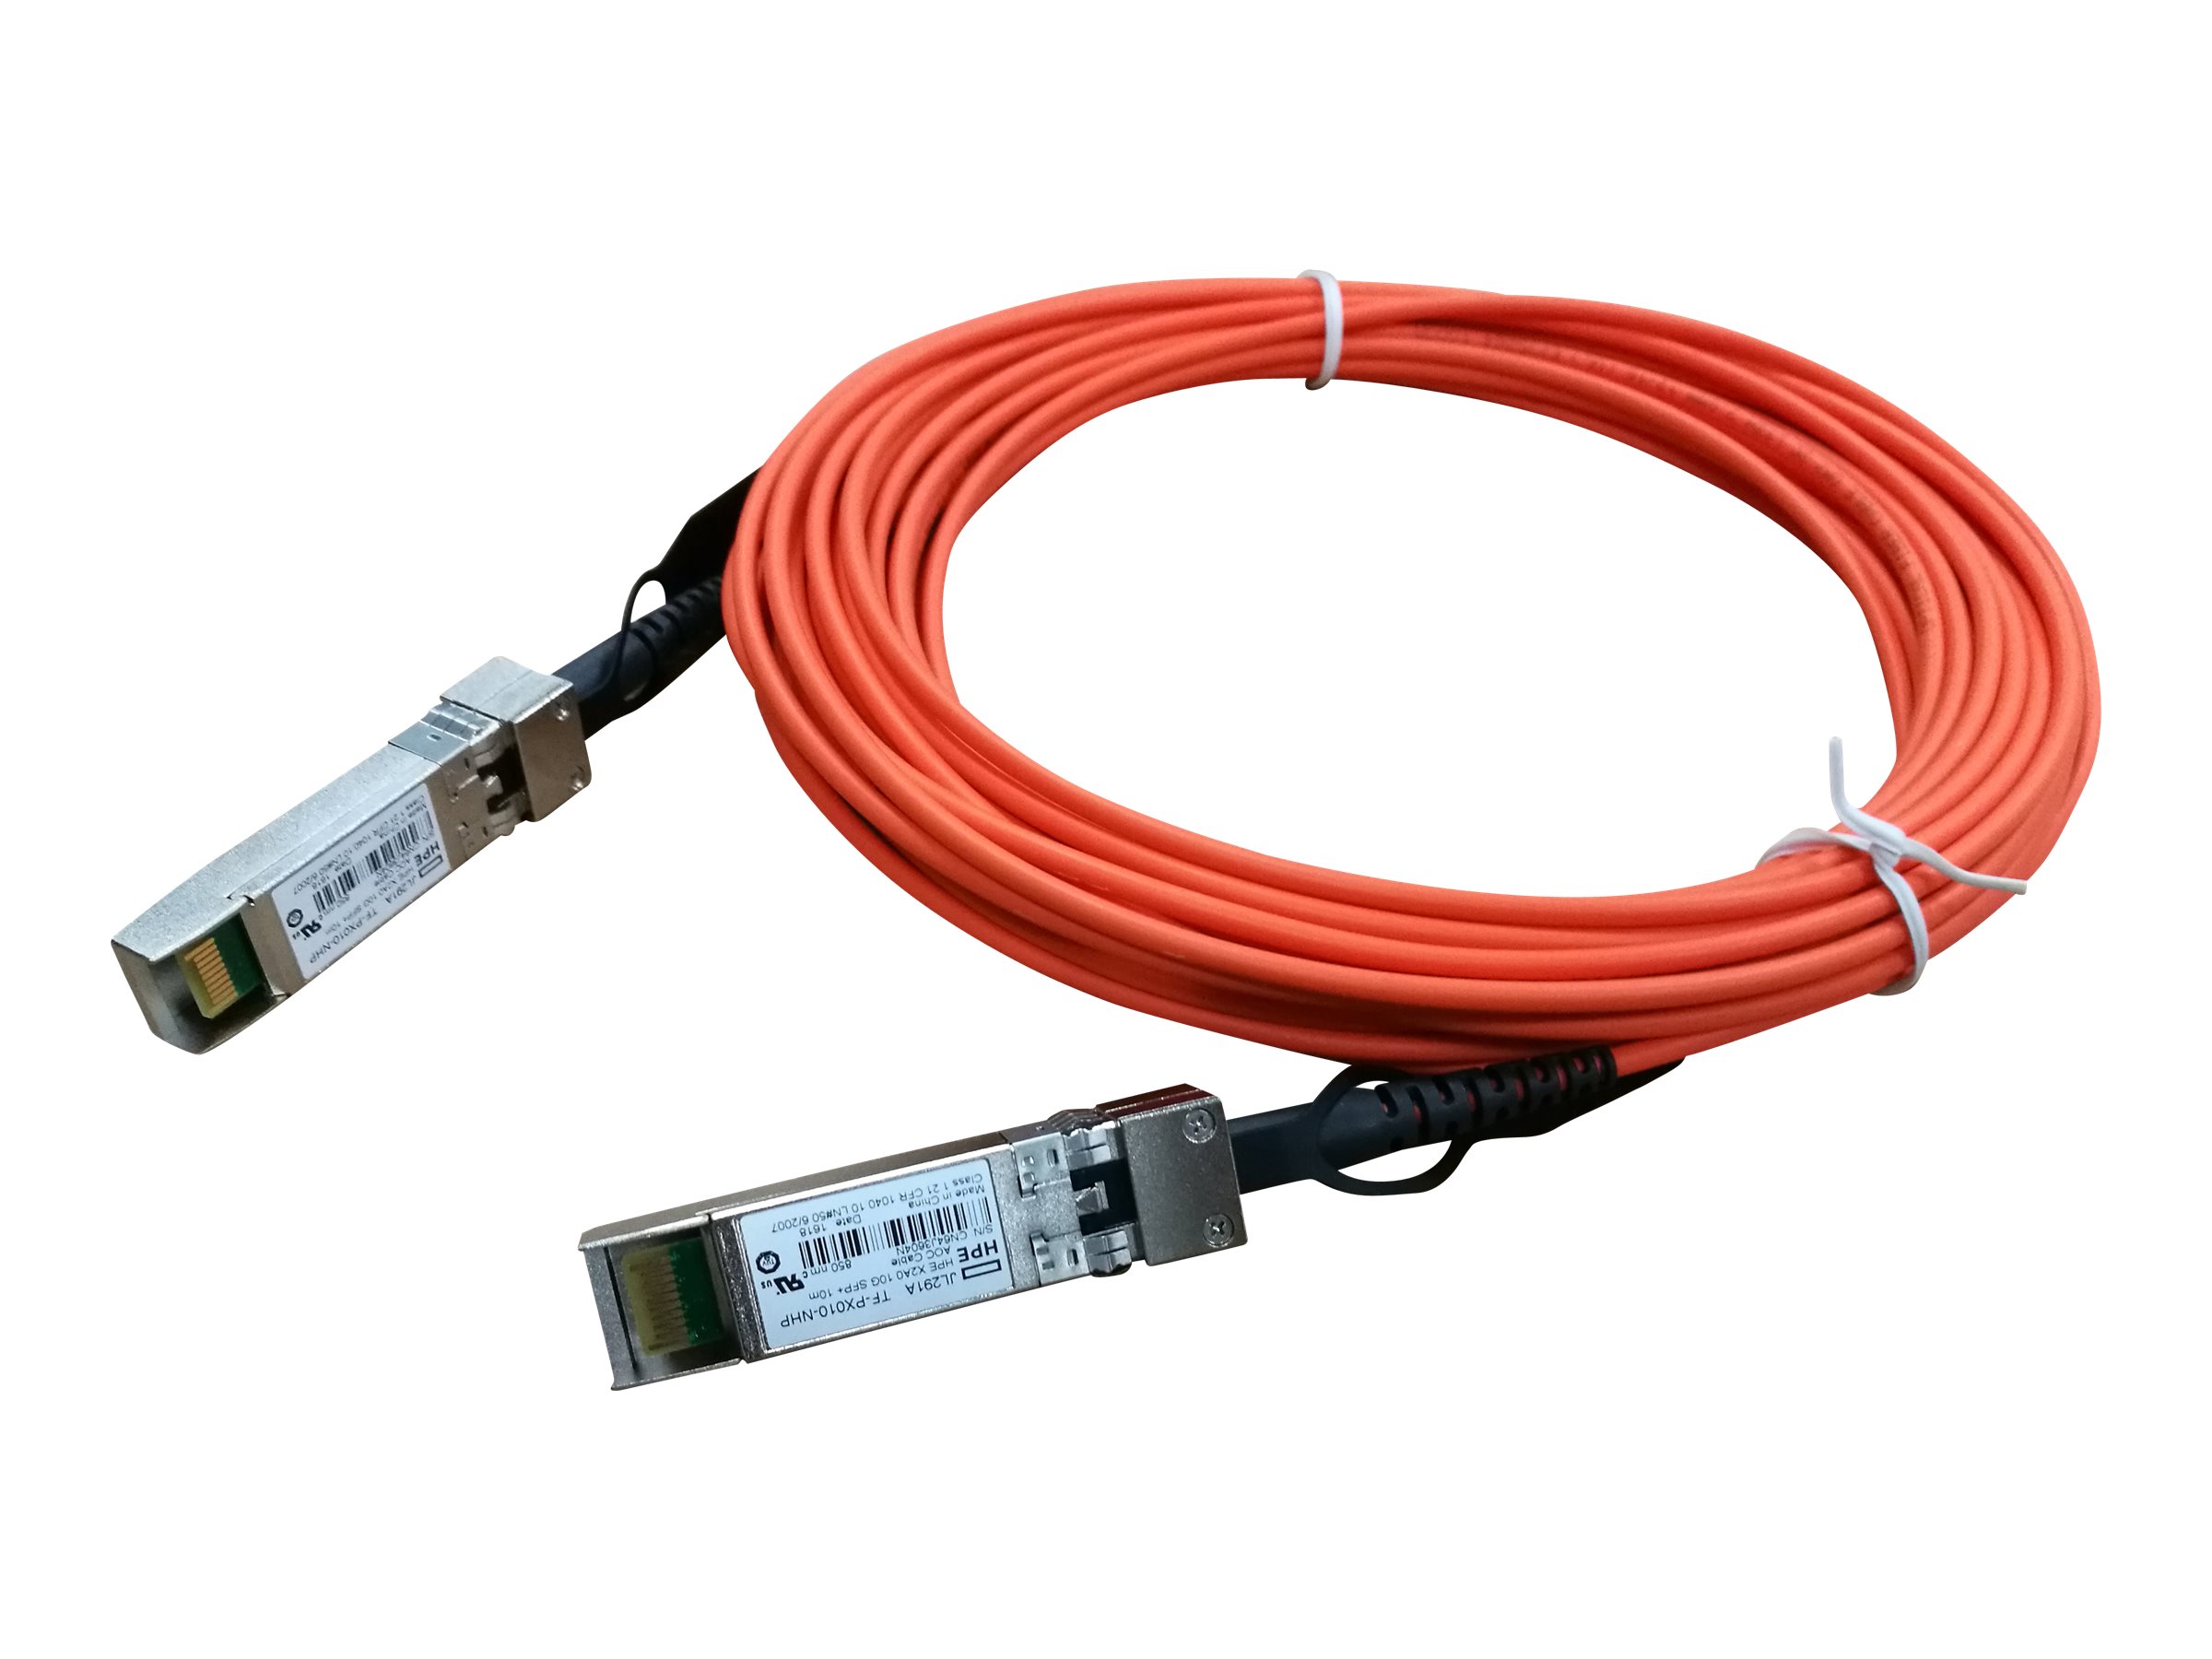 HPE X2A0 10G SFP+ 10m AOC Cable (JL291A)